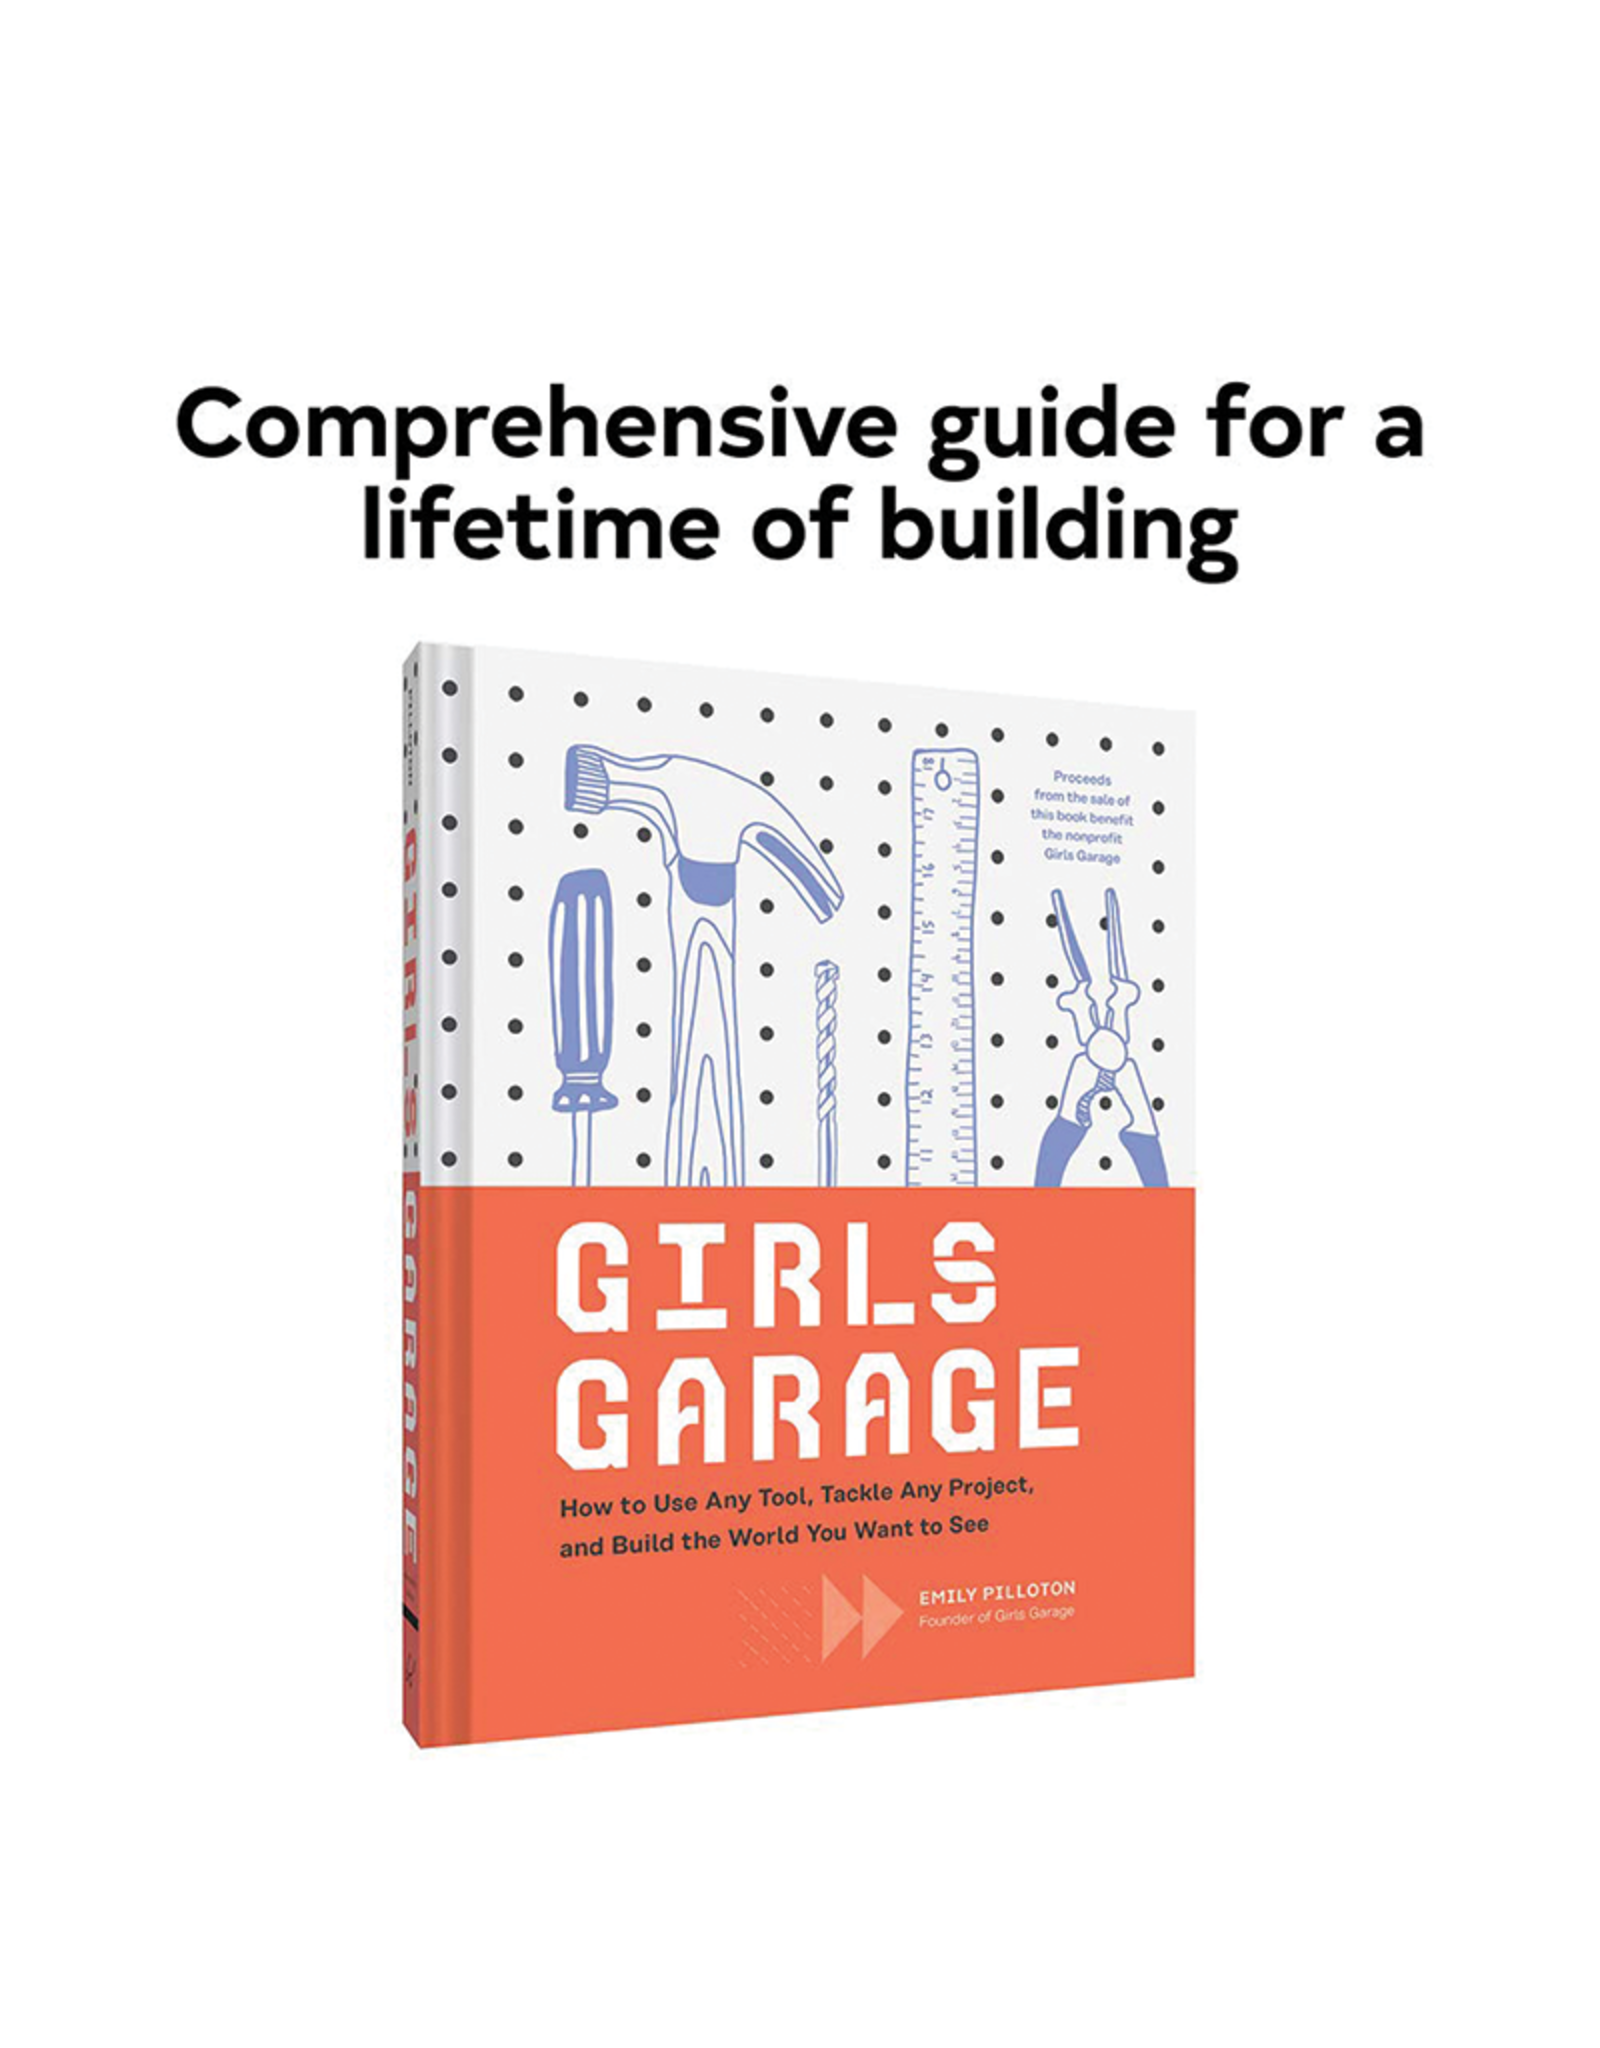 Girls Garage:  How to Use Any Tool, Tackle Any Project, and Build the World You Want to See